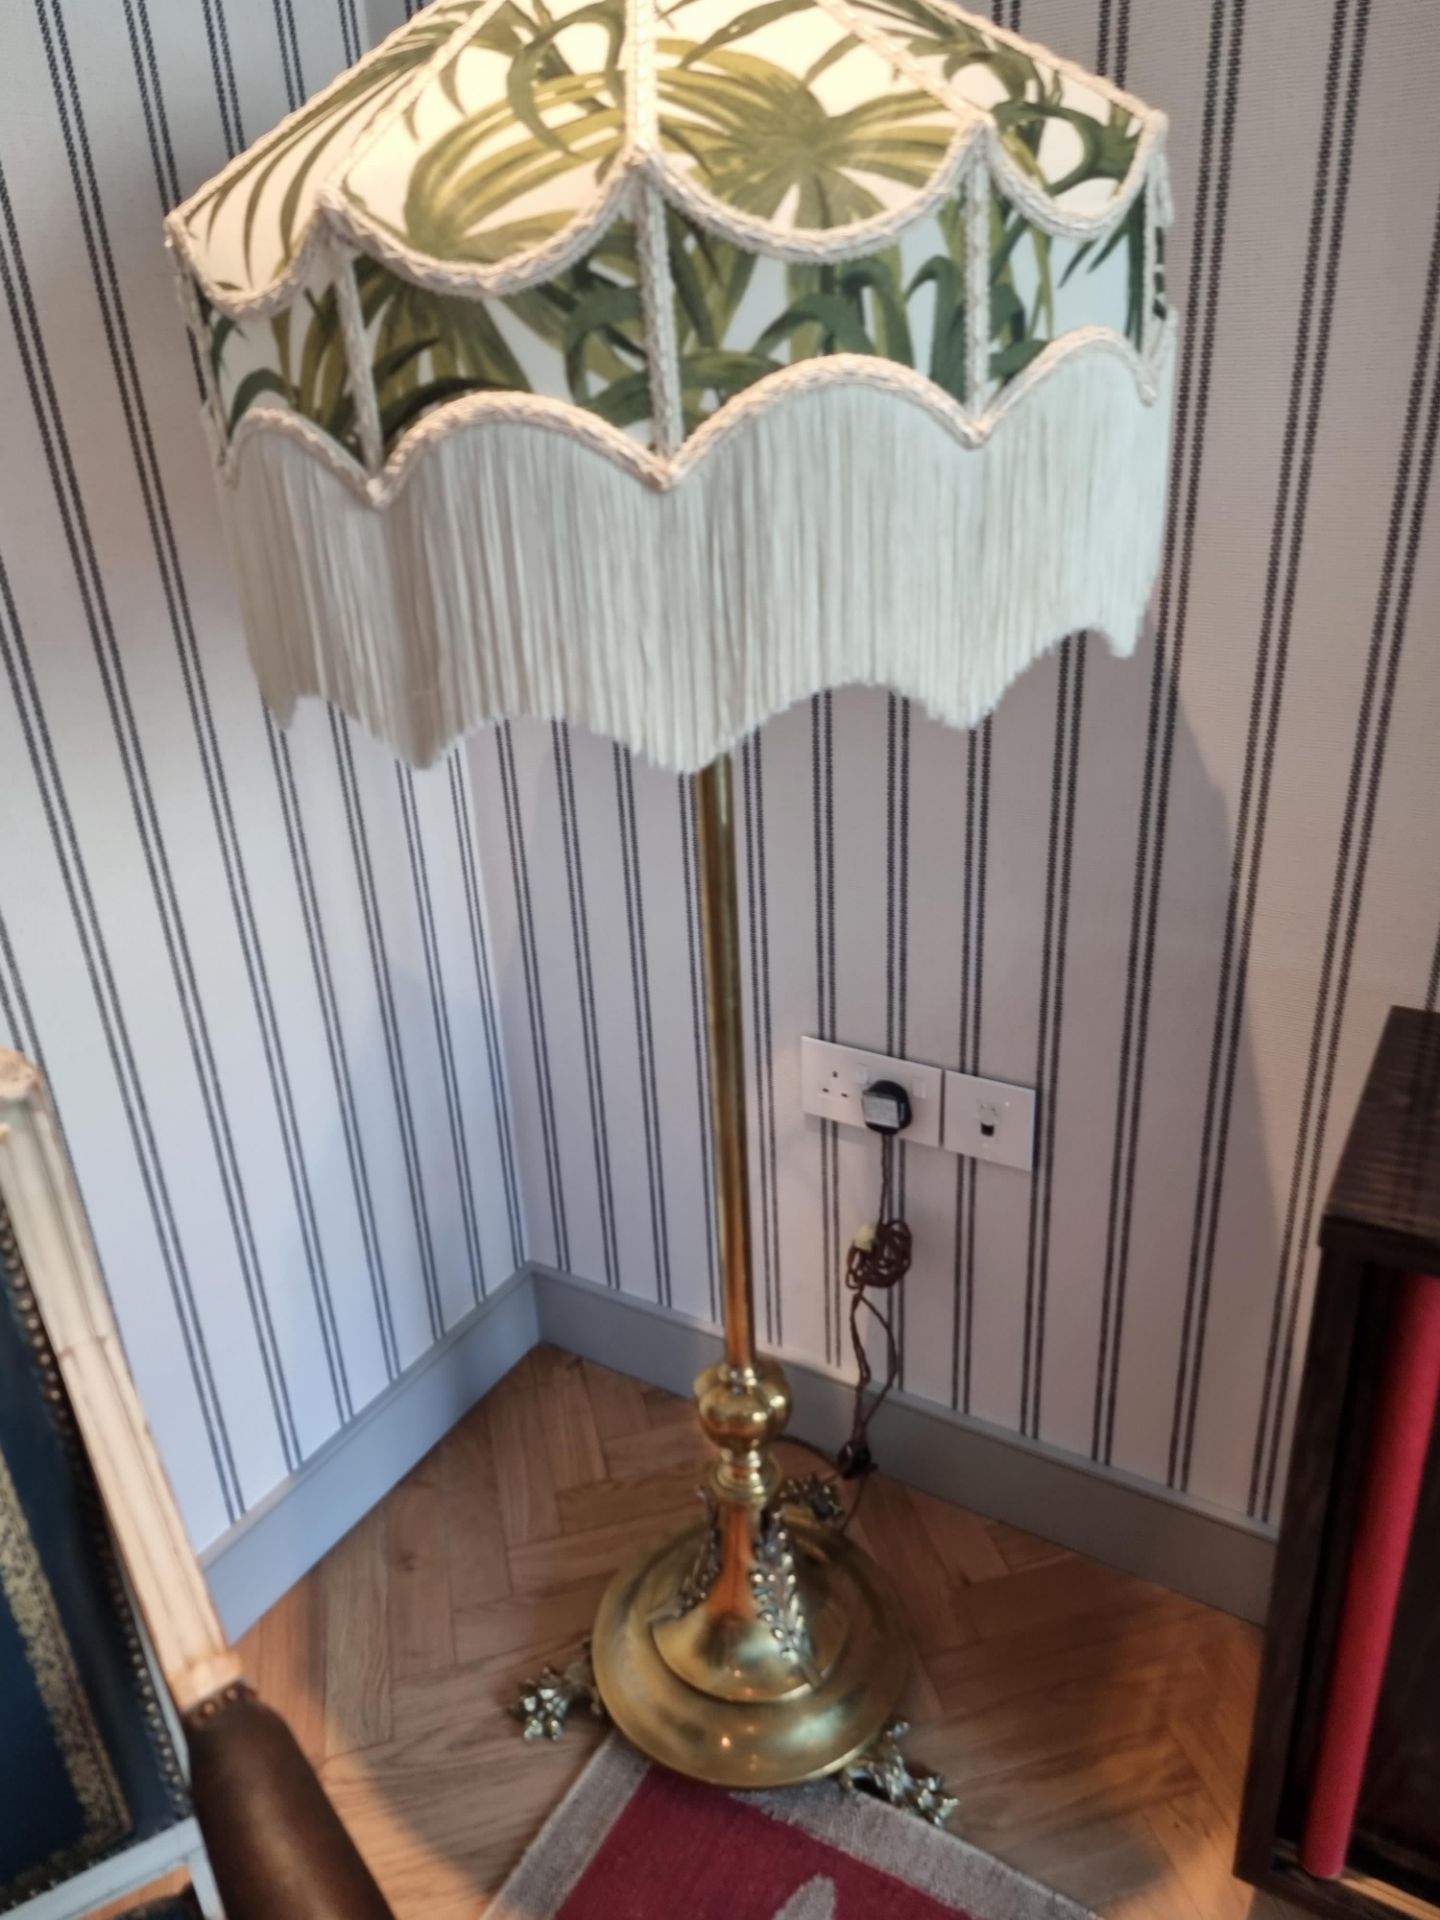 Edwardian Standard Lamp Elevate Your Space With An Exquisite Antique Brass Edwardian Standard - Image 3 of 4